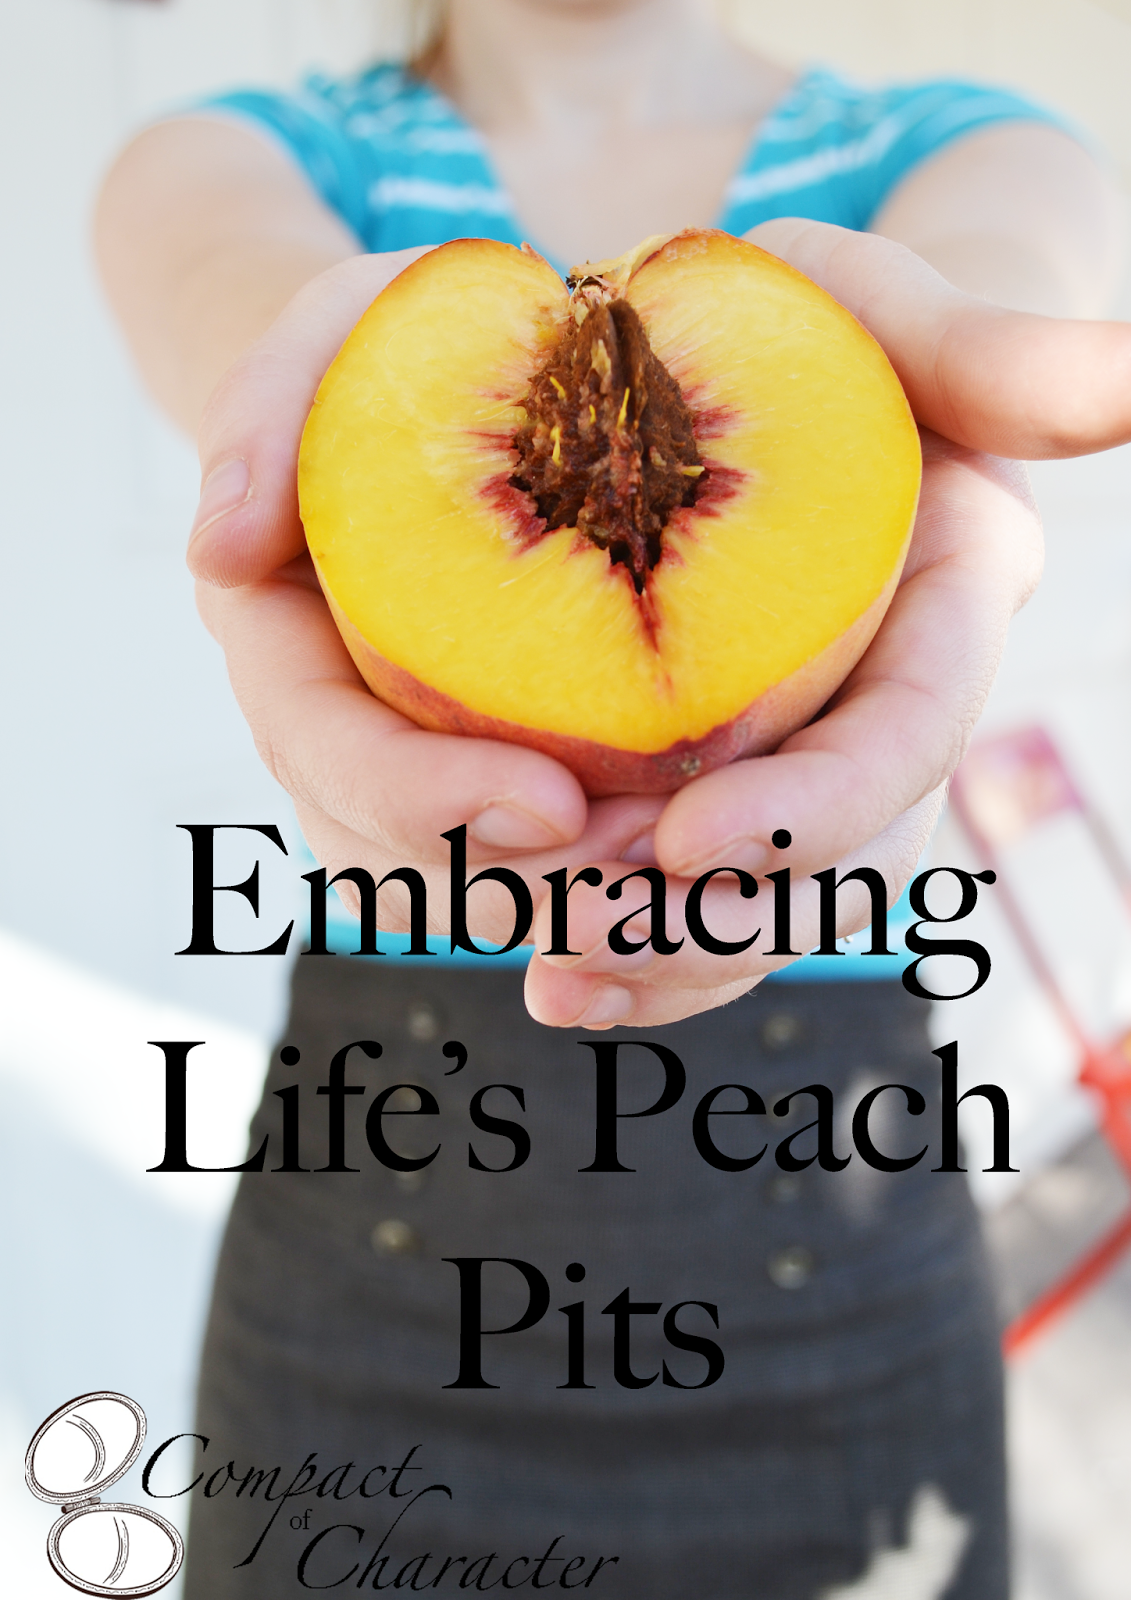 Flashback Summer: Planting for the Future & Embracing Life's Peach Pits